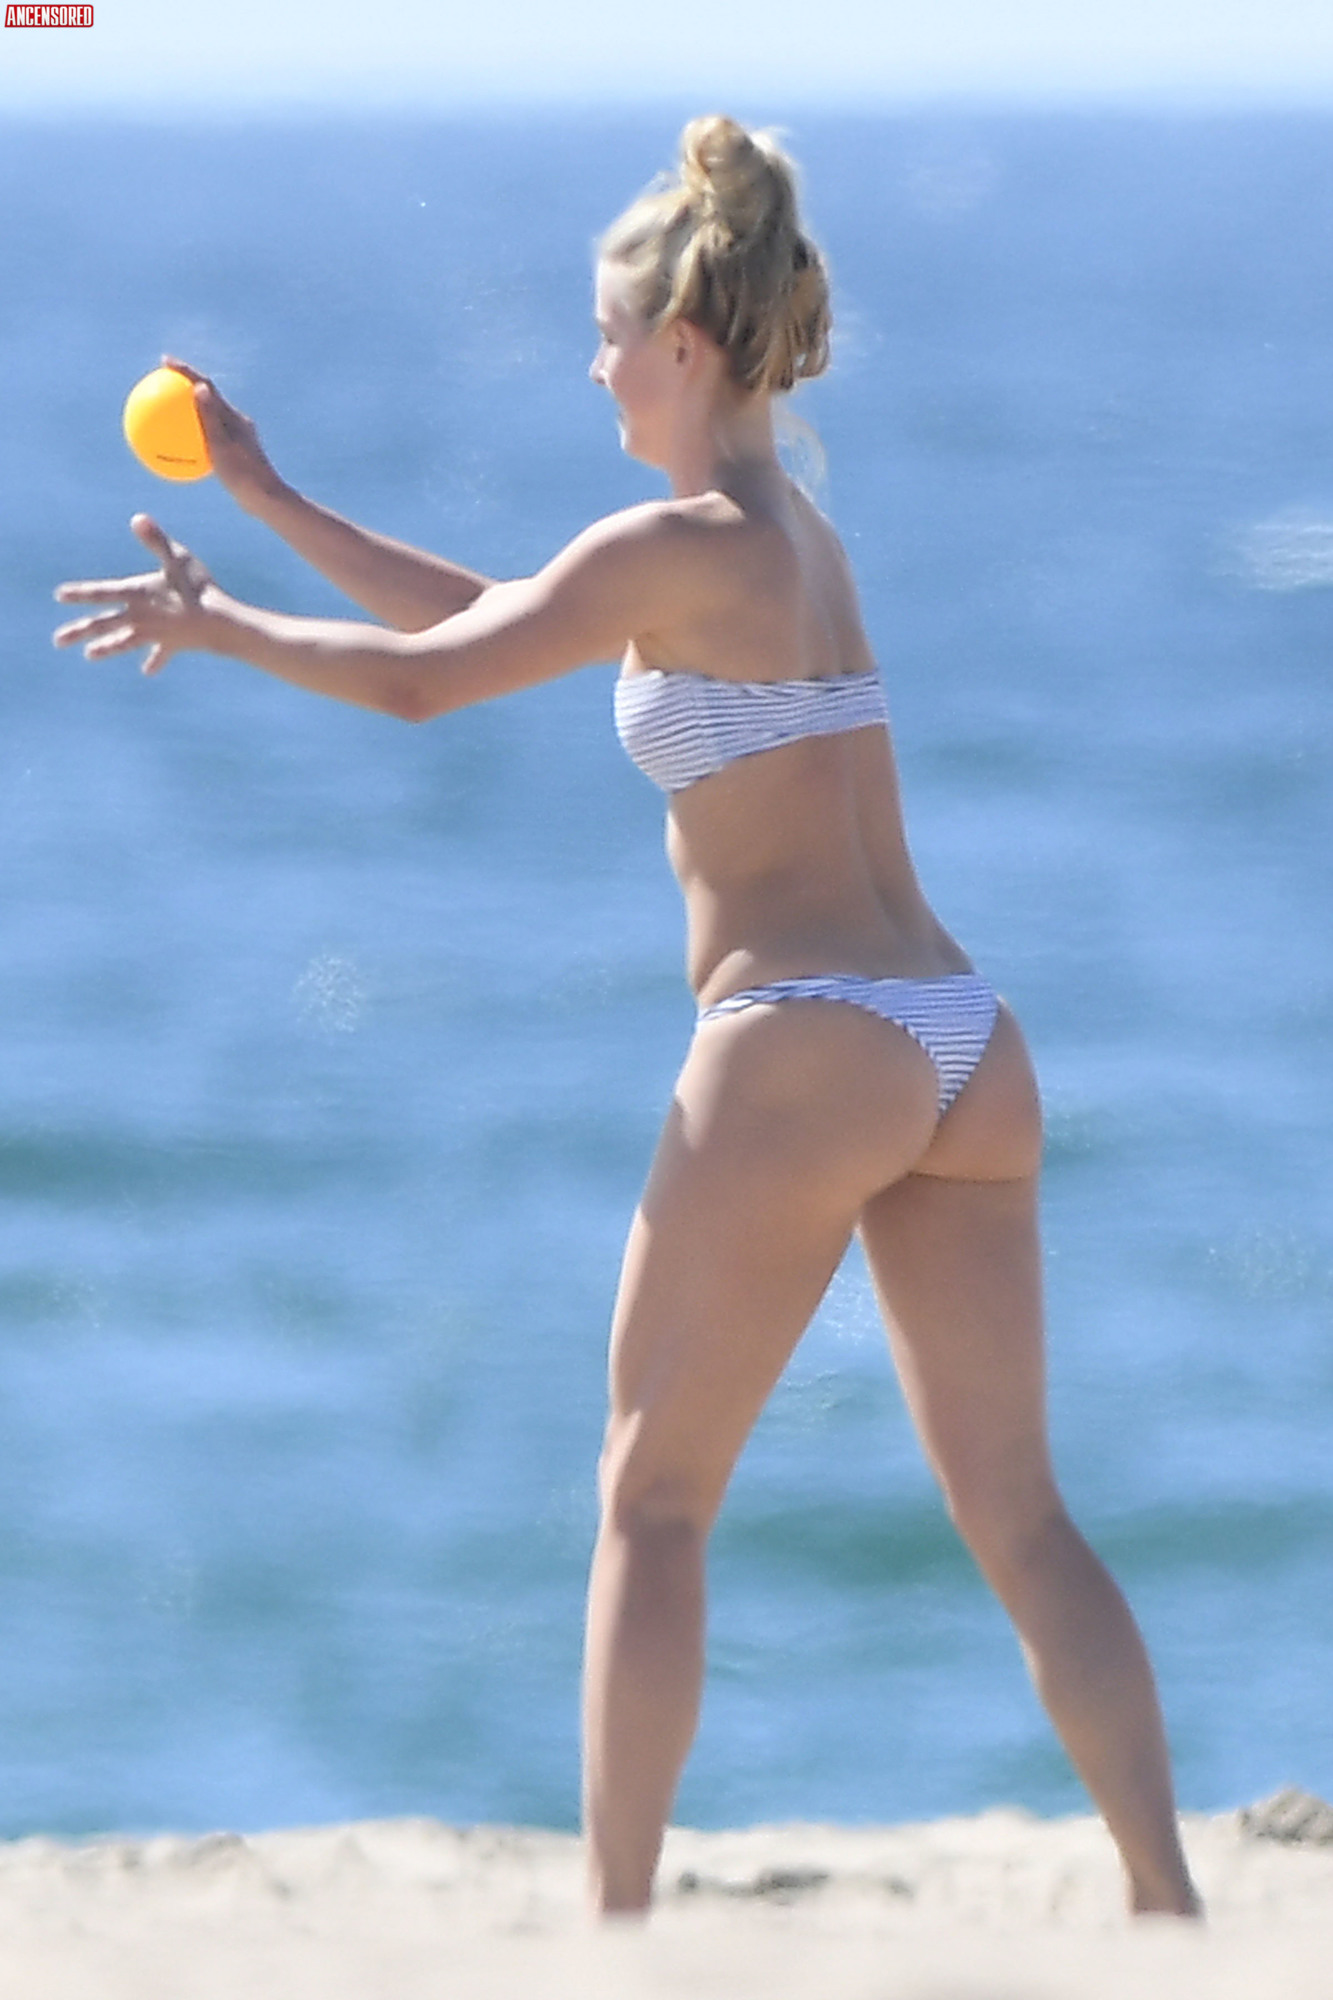 Naked Julianne Hough Added 01 28 2020 By Csyn